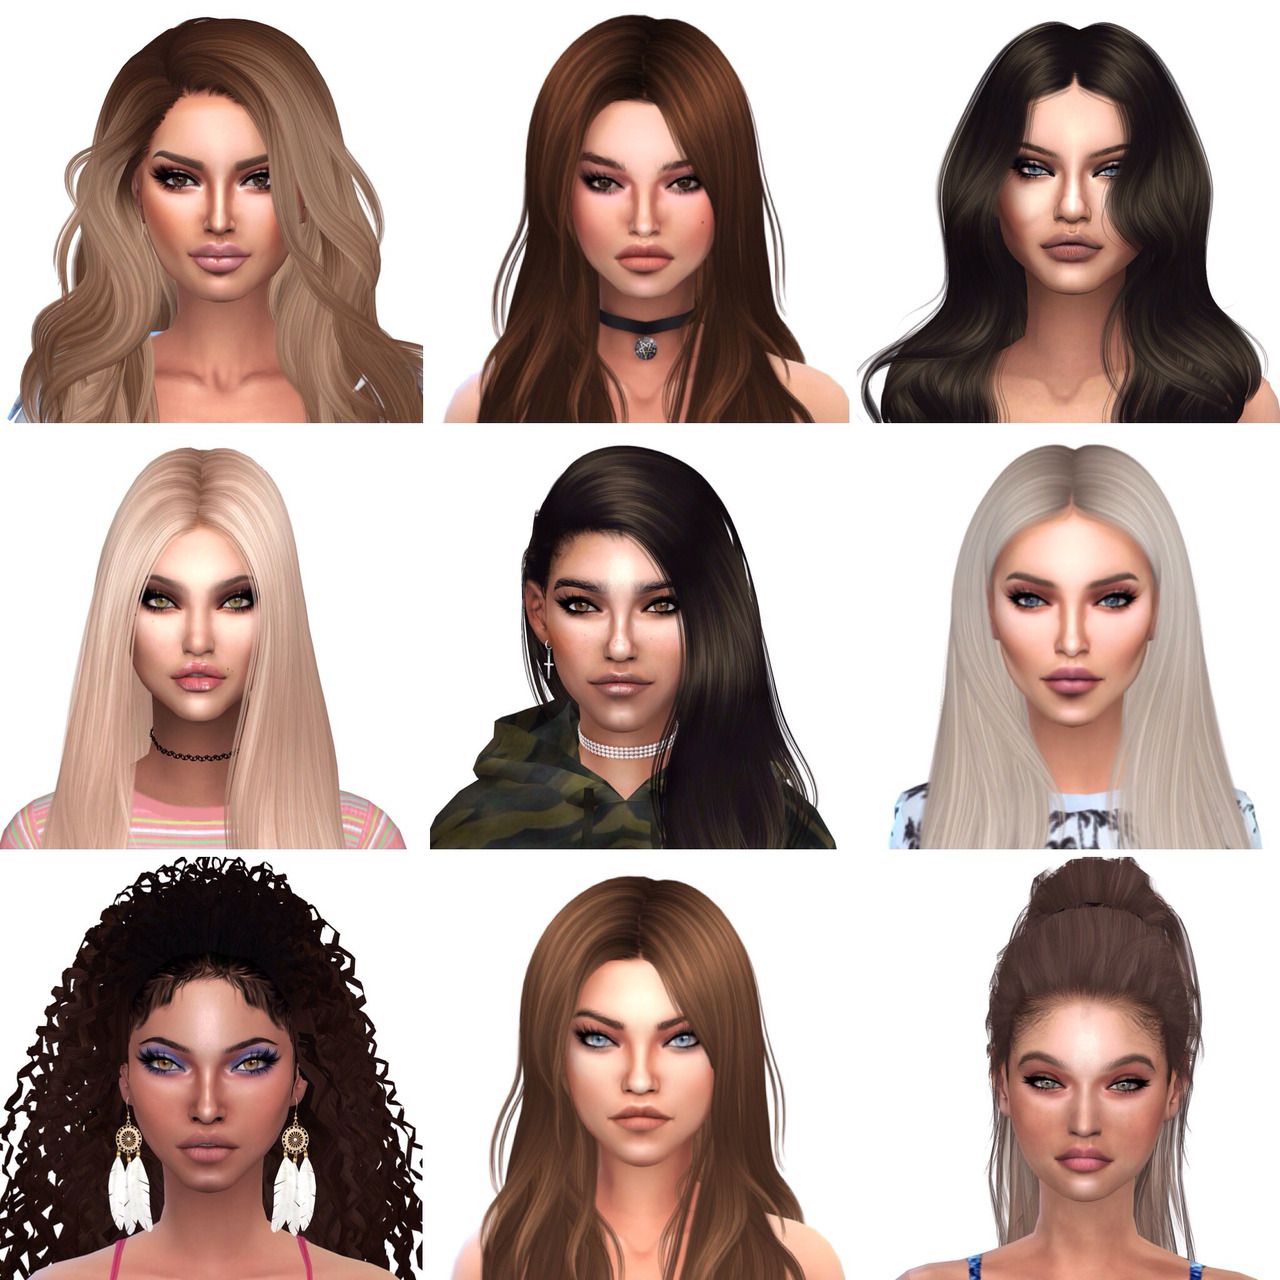 The Sims 4 Celebrity